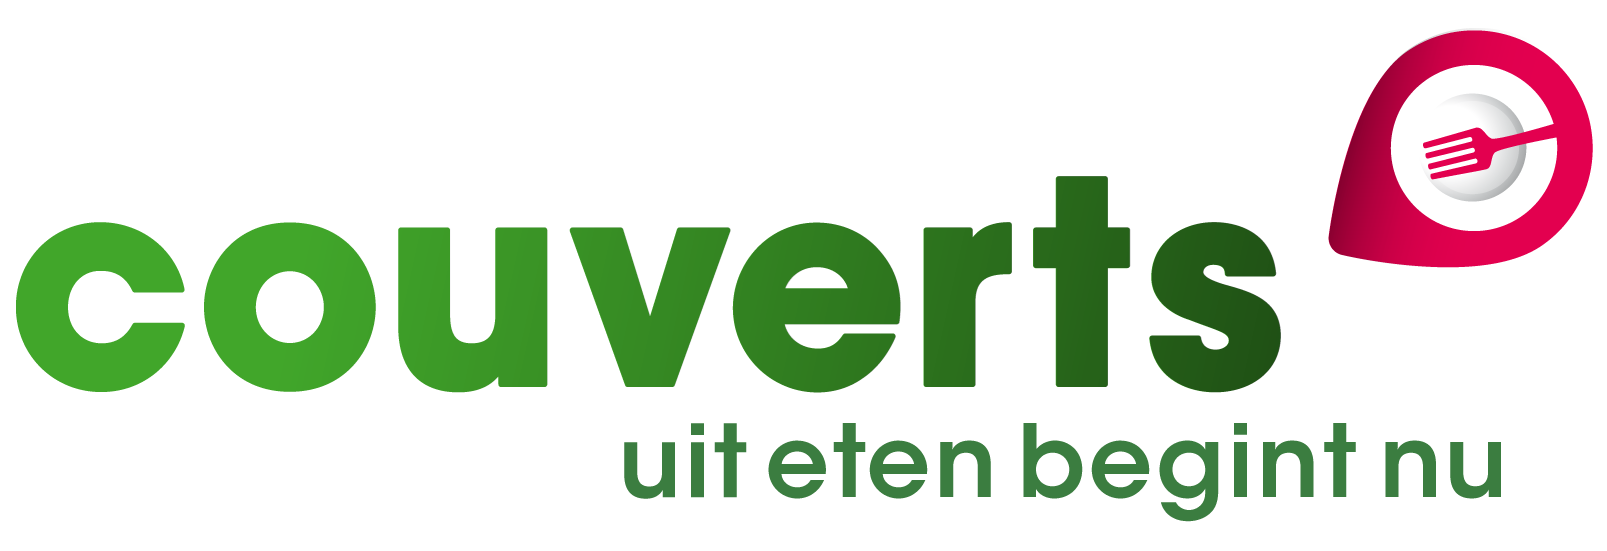 Logo-Couverts-Groen.png